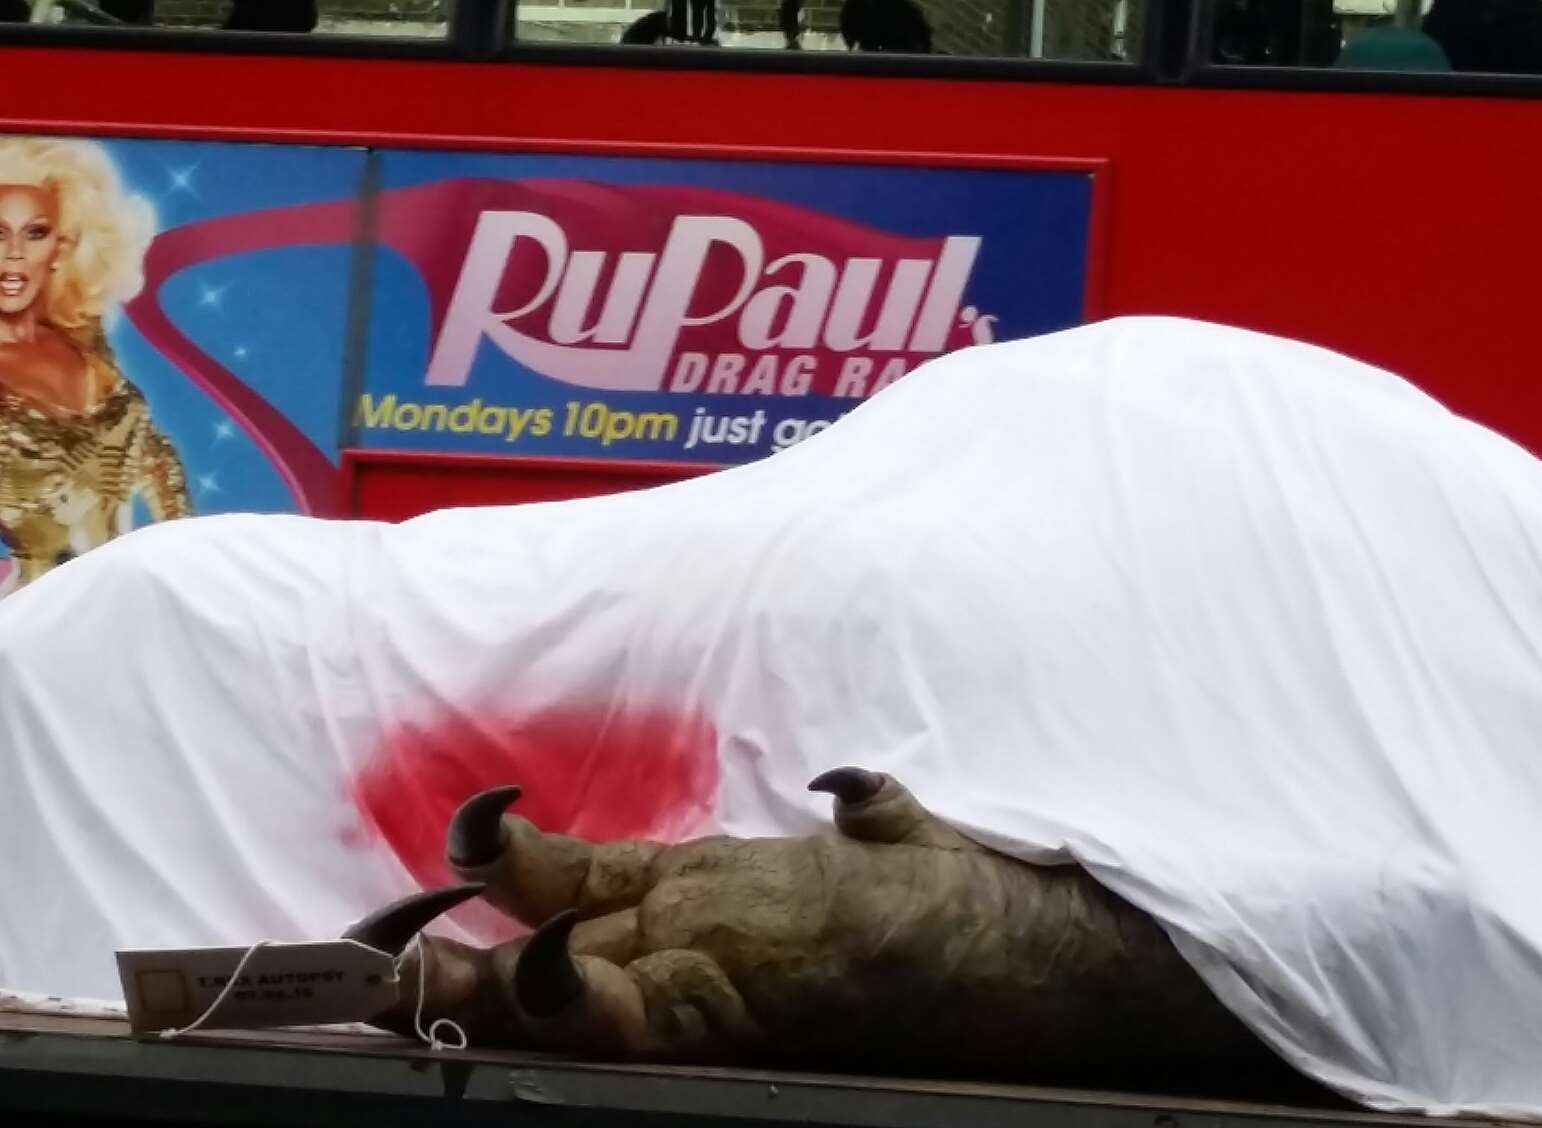 The giant dinosaur has been travelling through London covered by a blood-soaked sheet